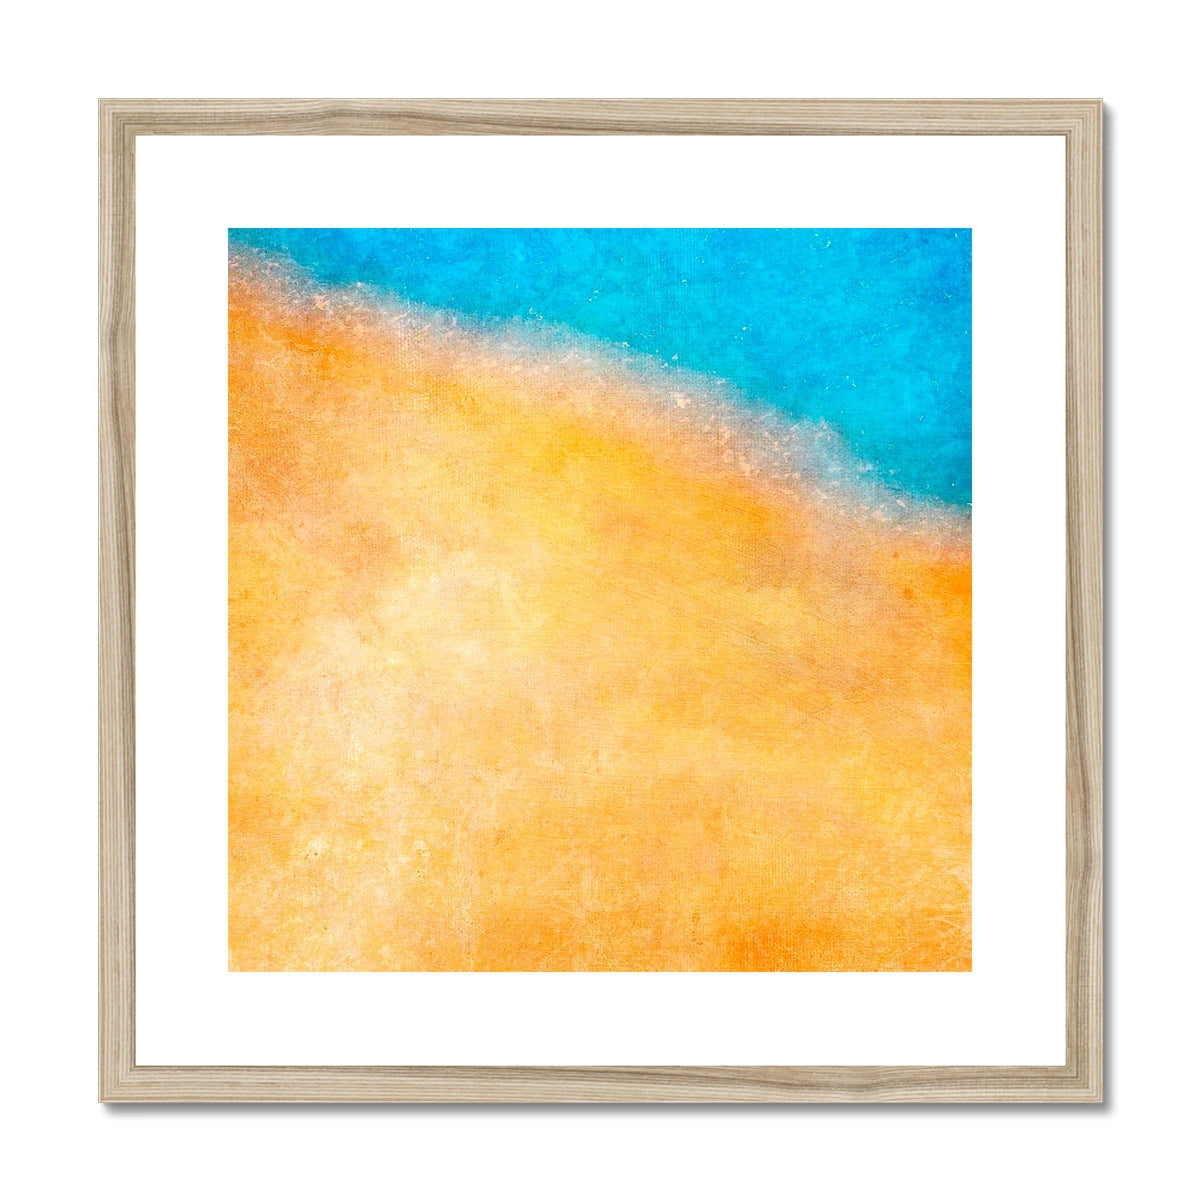 The Shoreline Abstract Painting | Framed & Mounted Prints From Scotland-Framed & Mounted Prints-Abstract & Impressionistic Art Gallery-20"x20"-Natural Frame-Paintings, Prints, Homeware, Art Gifts From Scotland By Scottish Artist Kevin Hunter